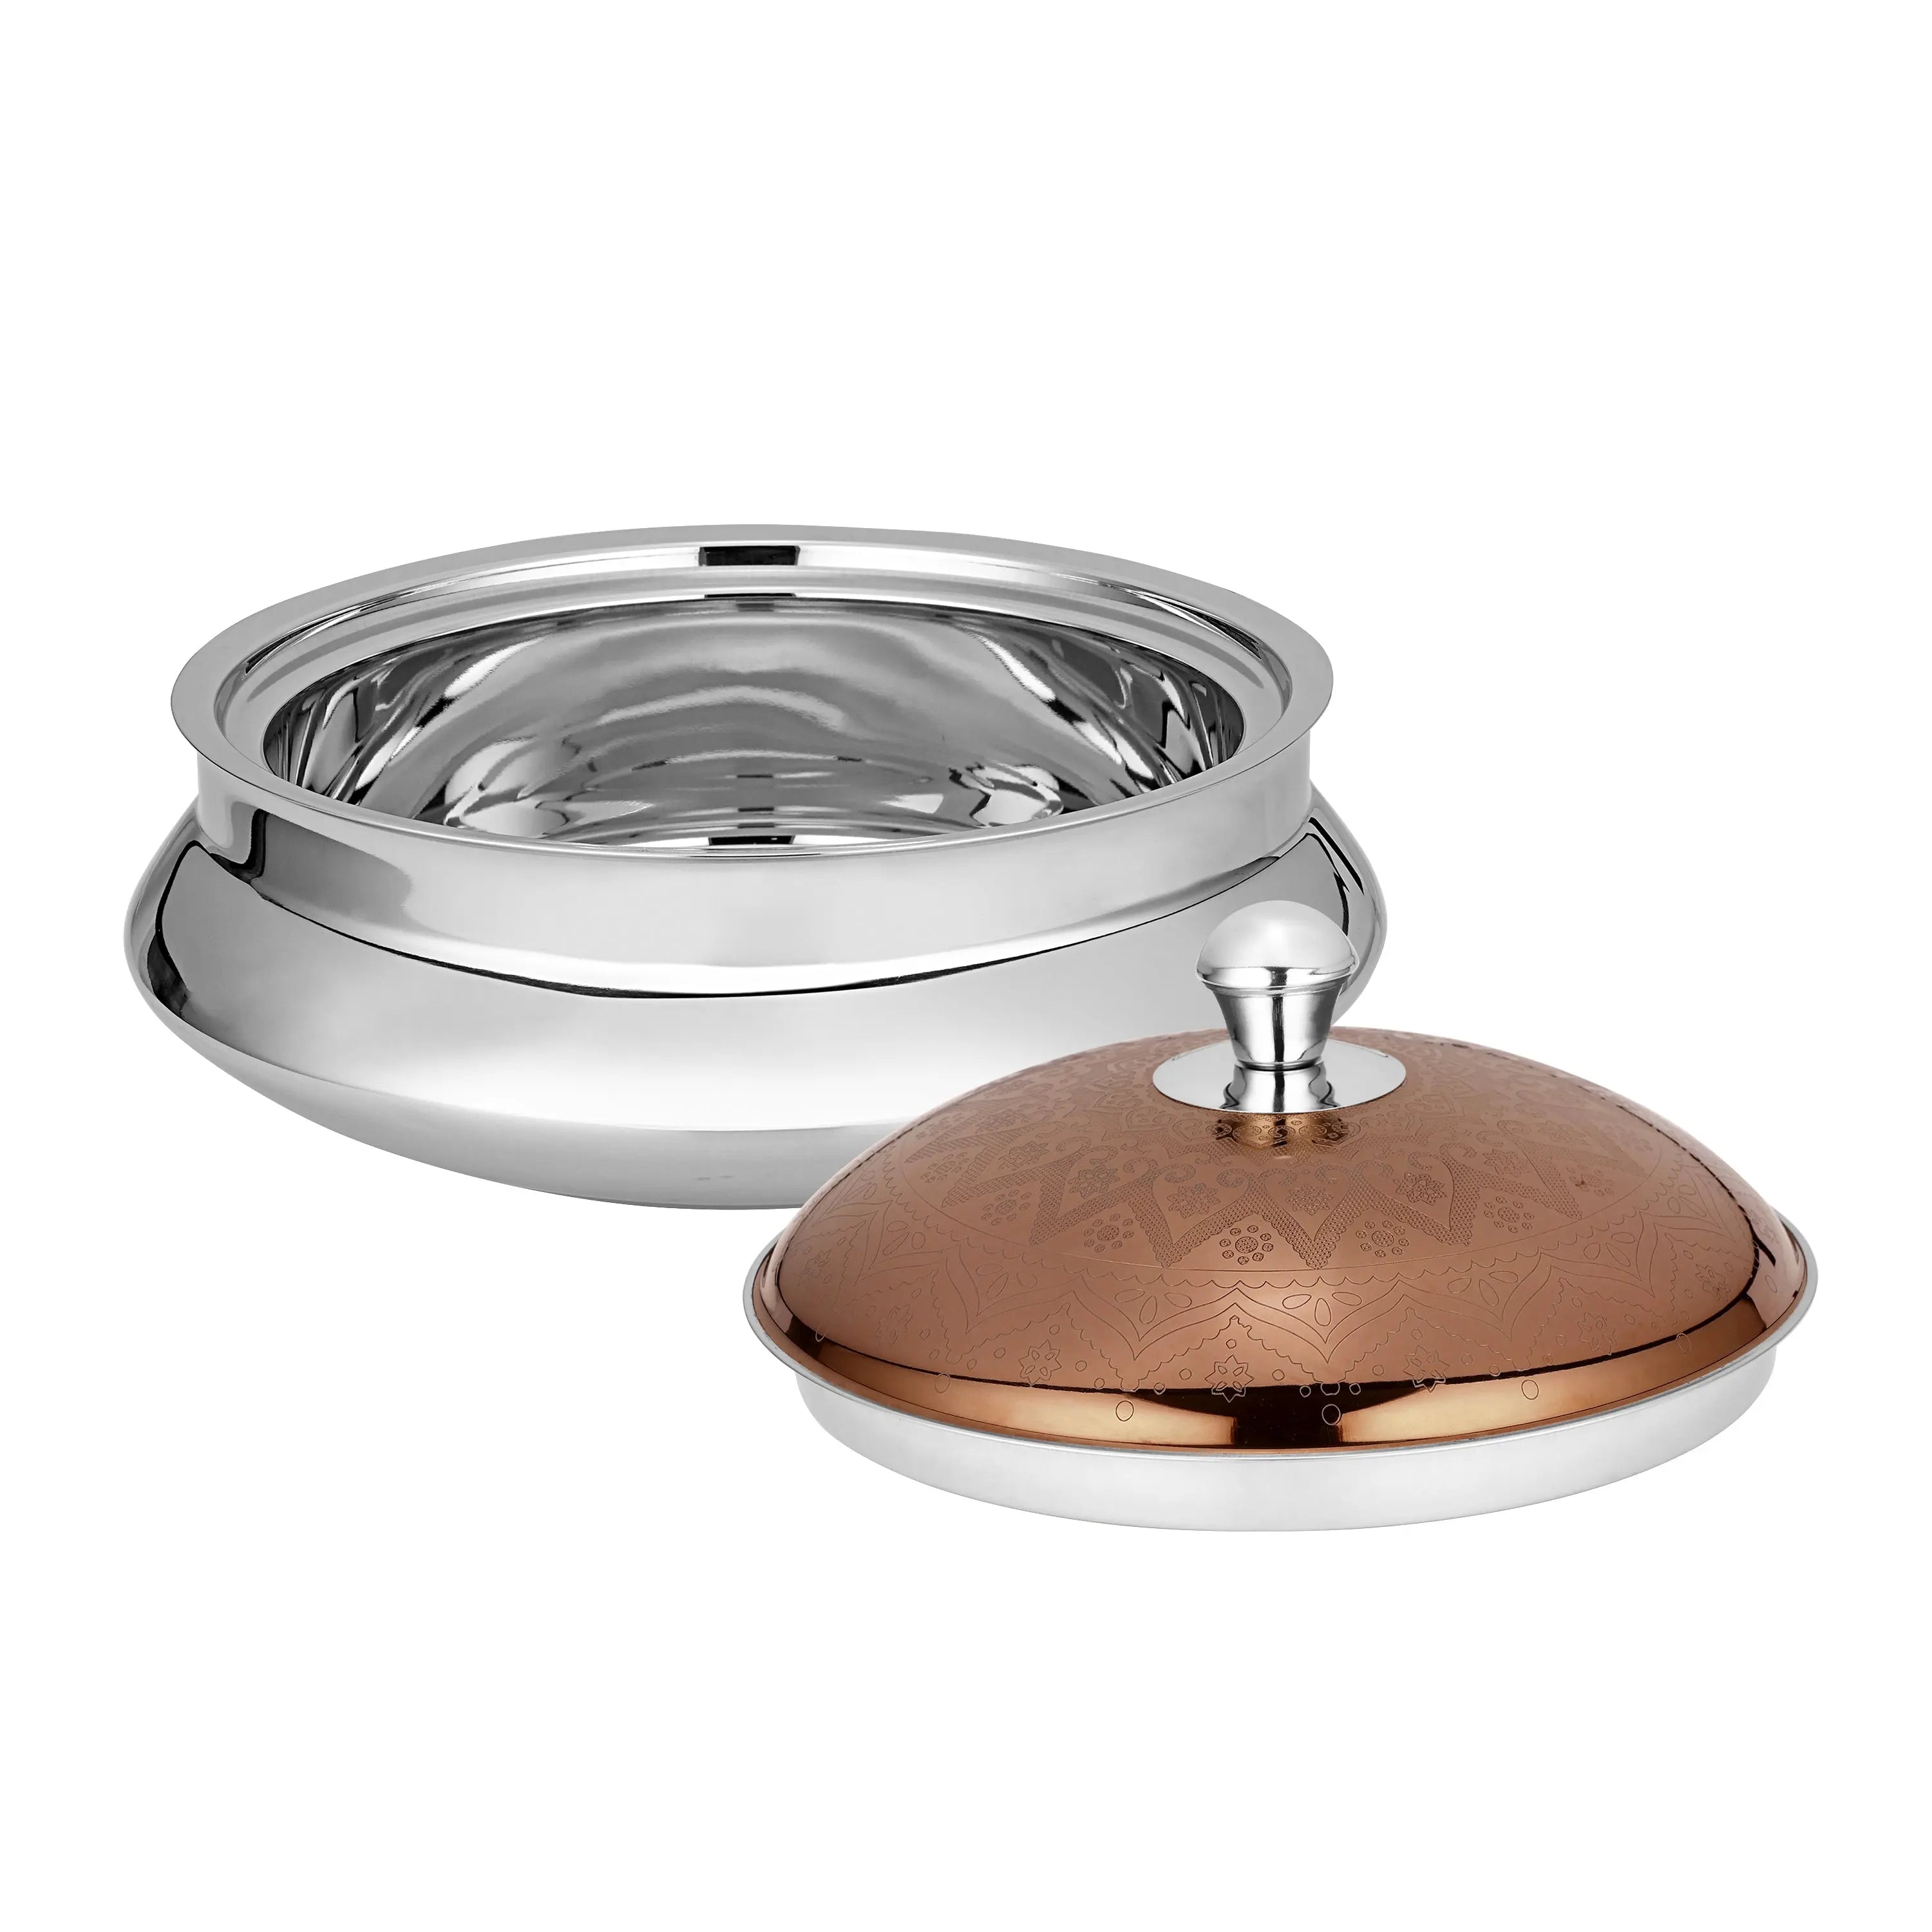 STAINLESS STEEL CASSEROLE MILANO ROSE GOLD ETCHING - CROCKERY WALA AND COMPANY 